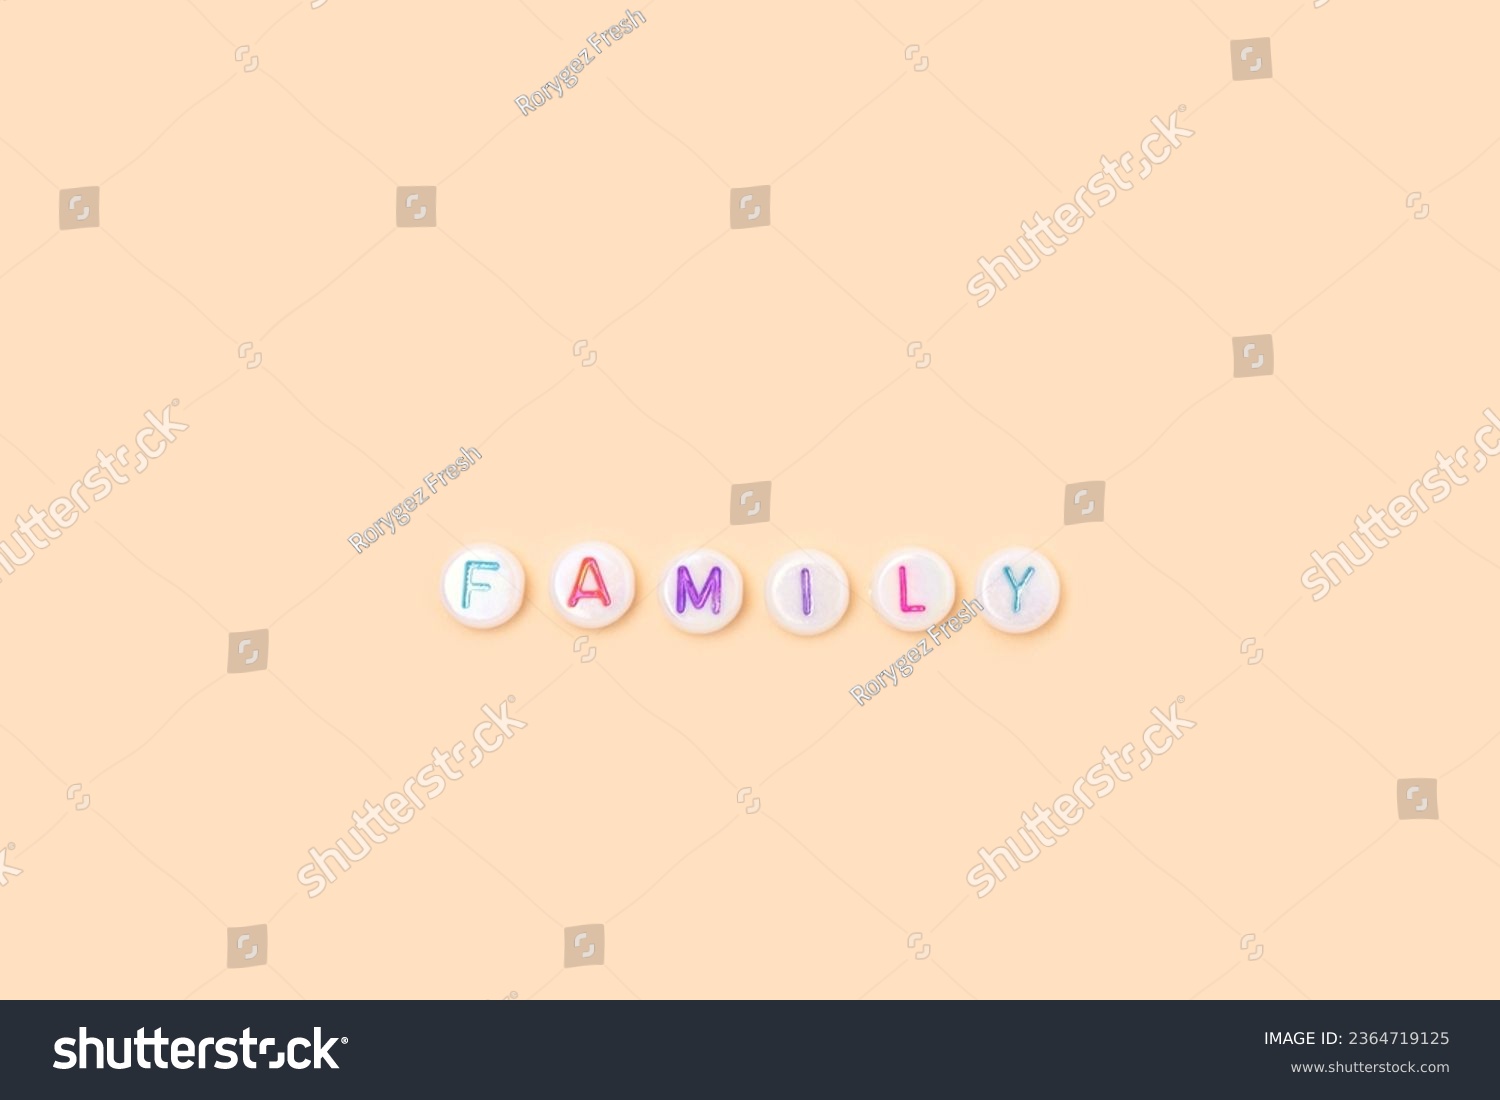 Word Family. Quote made of white round beads with colorful letters on a beige background.  #2364719125